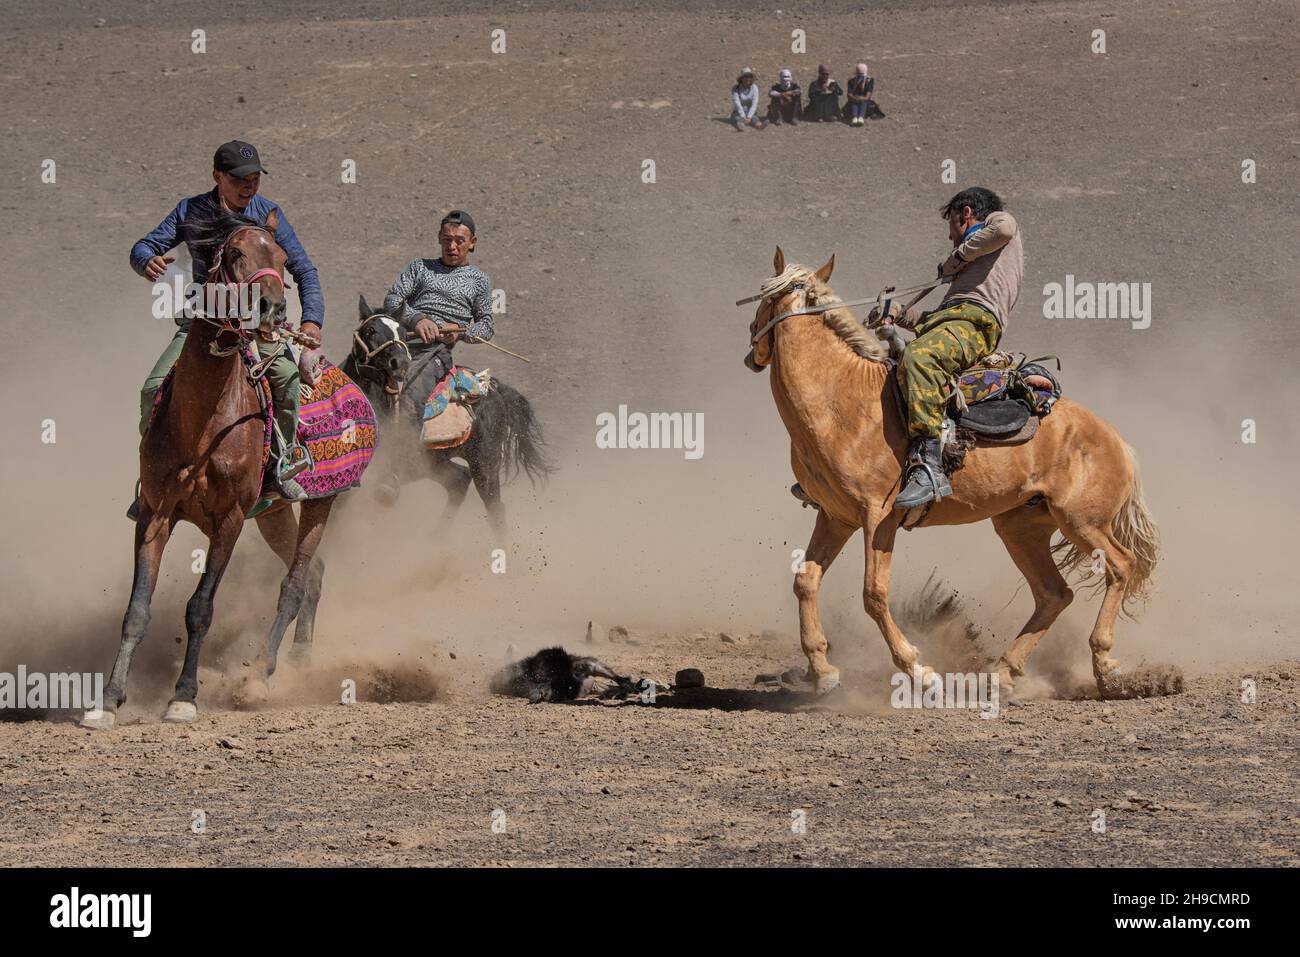 Horse riders competing in the traditional sport of 'ulak-tartysh-buzkashi' - goat polo at Murghab Horse festival, Tajikistan in August 2019 Stock Photo